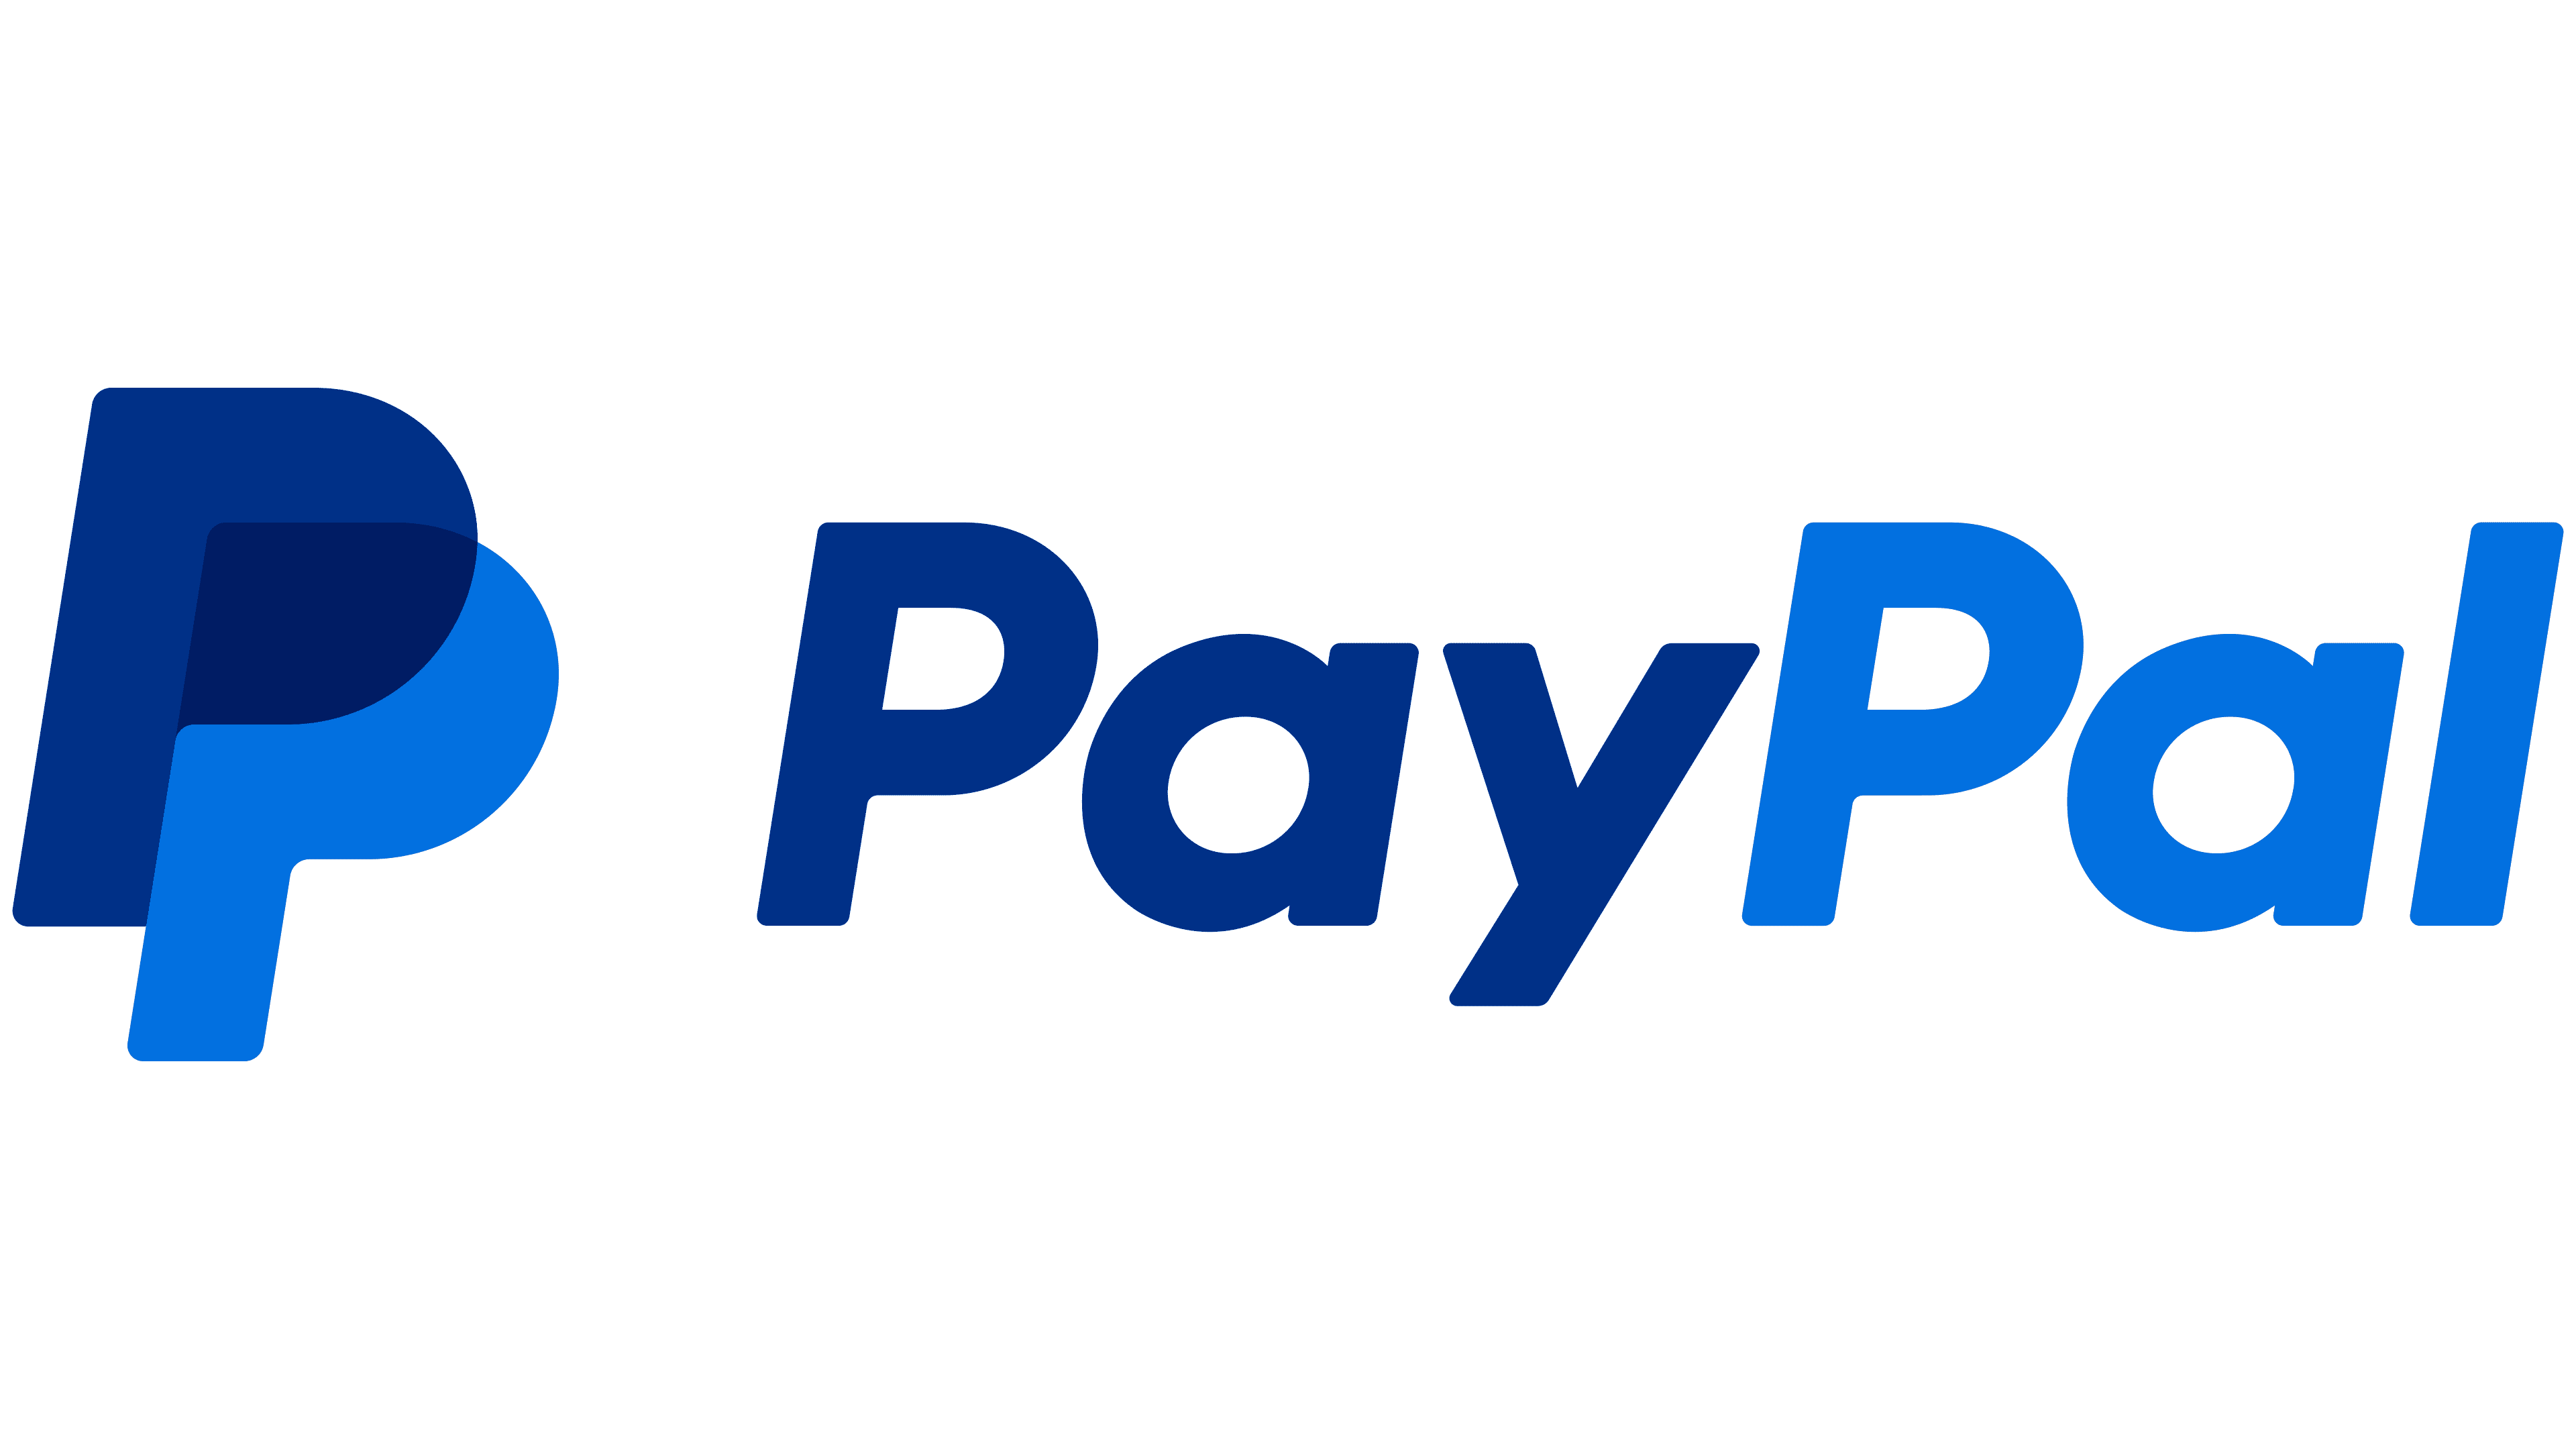 A green background with the word paypal written in blue.